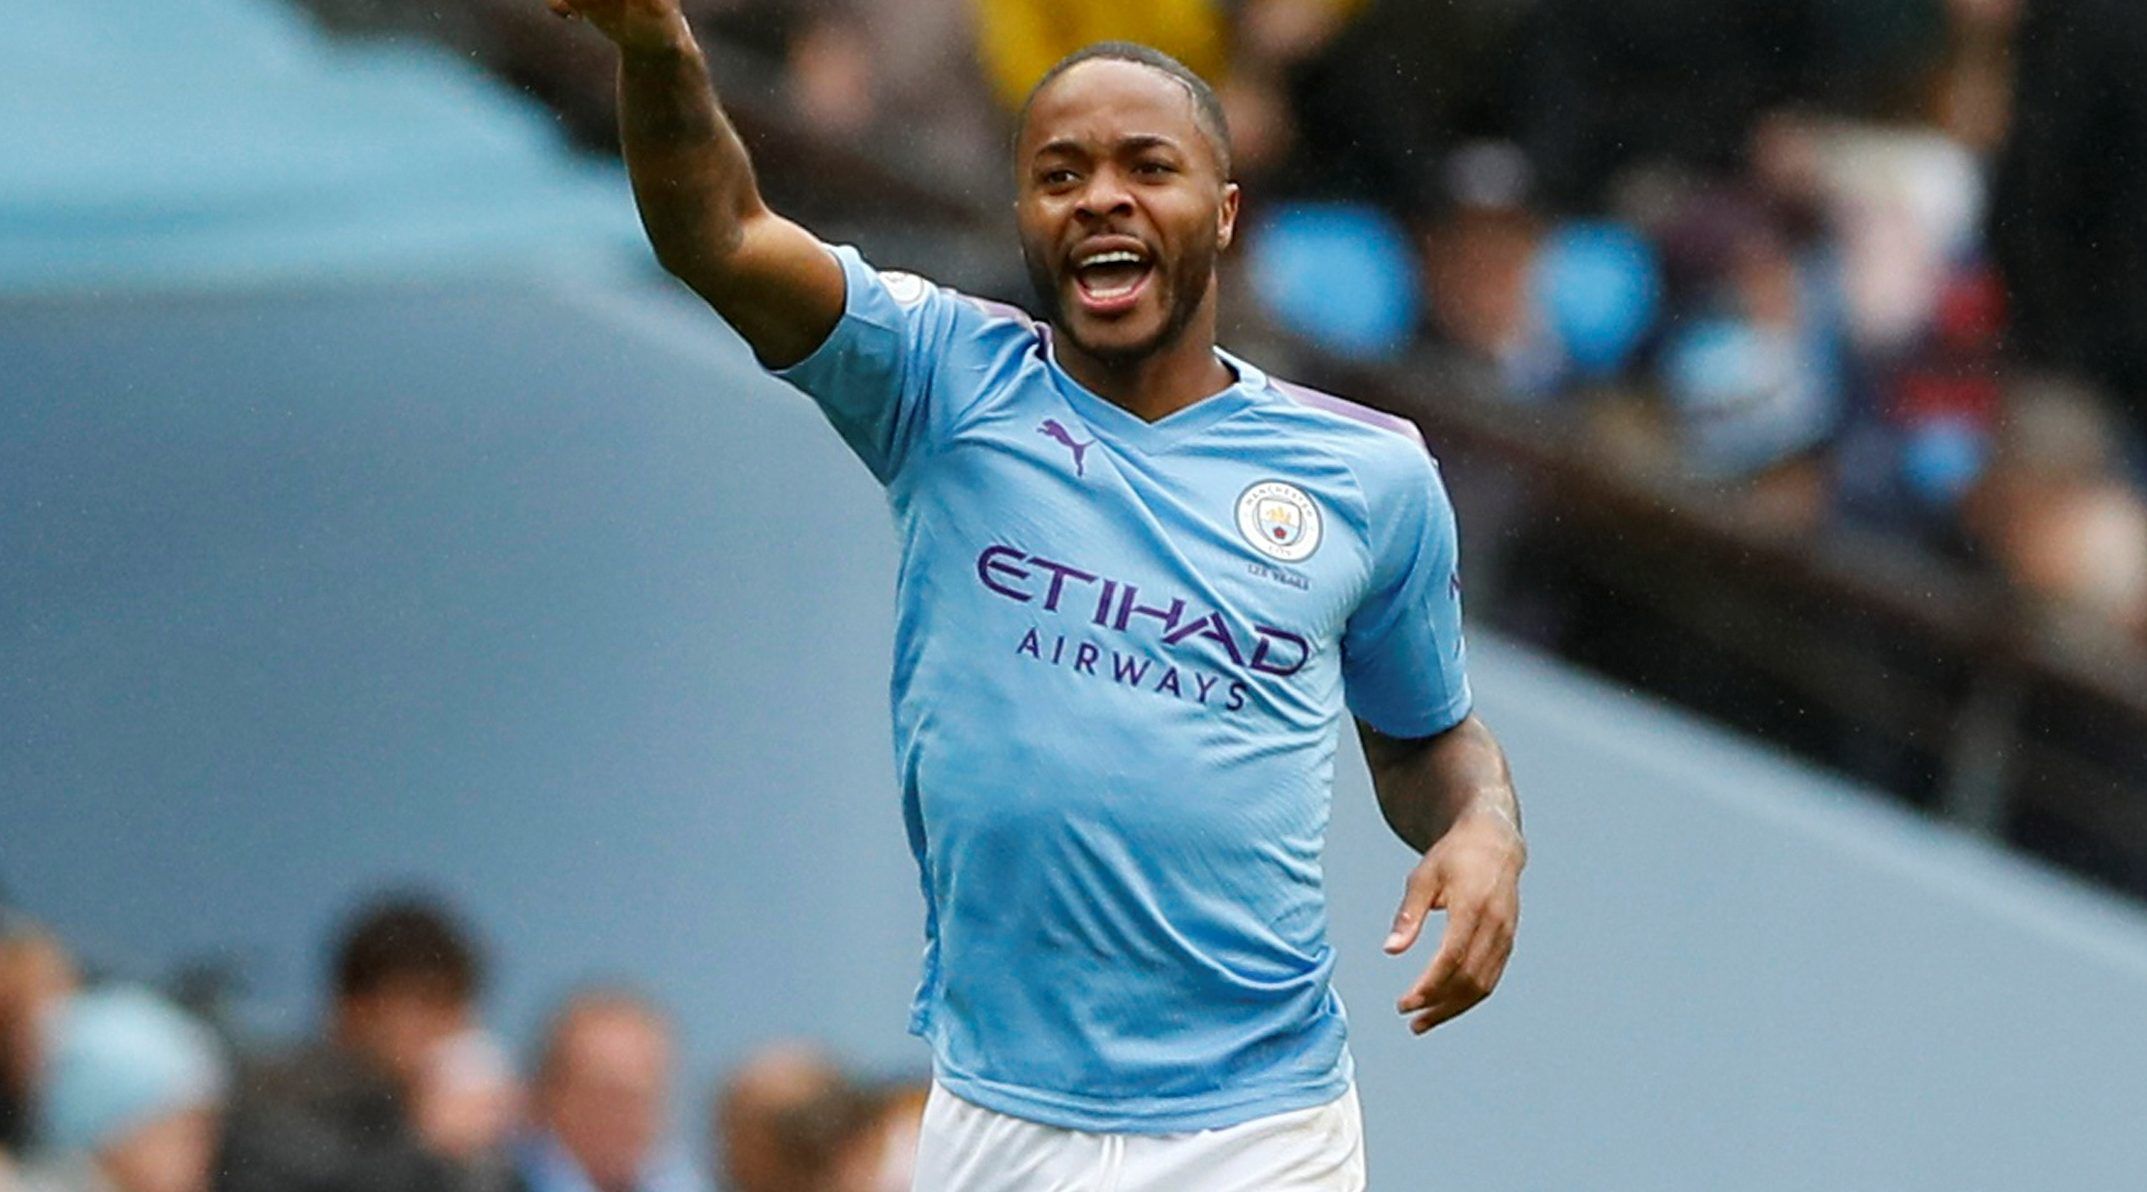 Soccer Football - Premier League - Manchester City v Aston Villa - Etihad Stadium, Manchester, Britain - October 26, 2019  Manchester City's Raheem Sterling celebrates scoring their first goal       Action Images via Reuters/Jason Cairnduff  EDITORIAL USE ONLY. No use with unauthorized audio, video, data, fixture lists, club/league logos or 